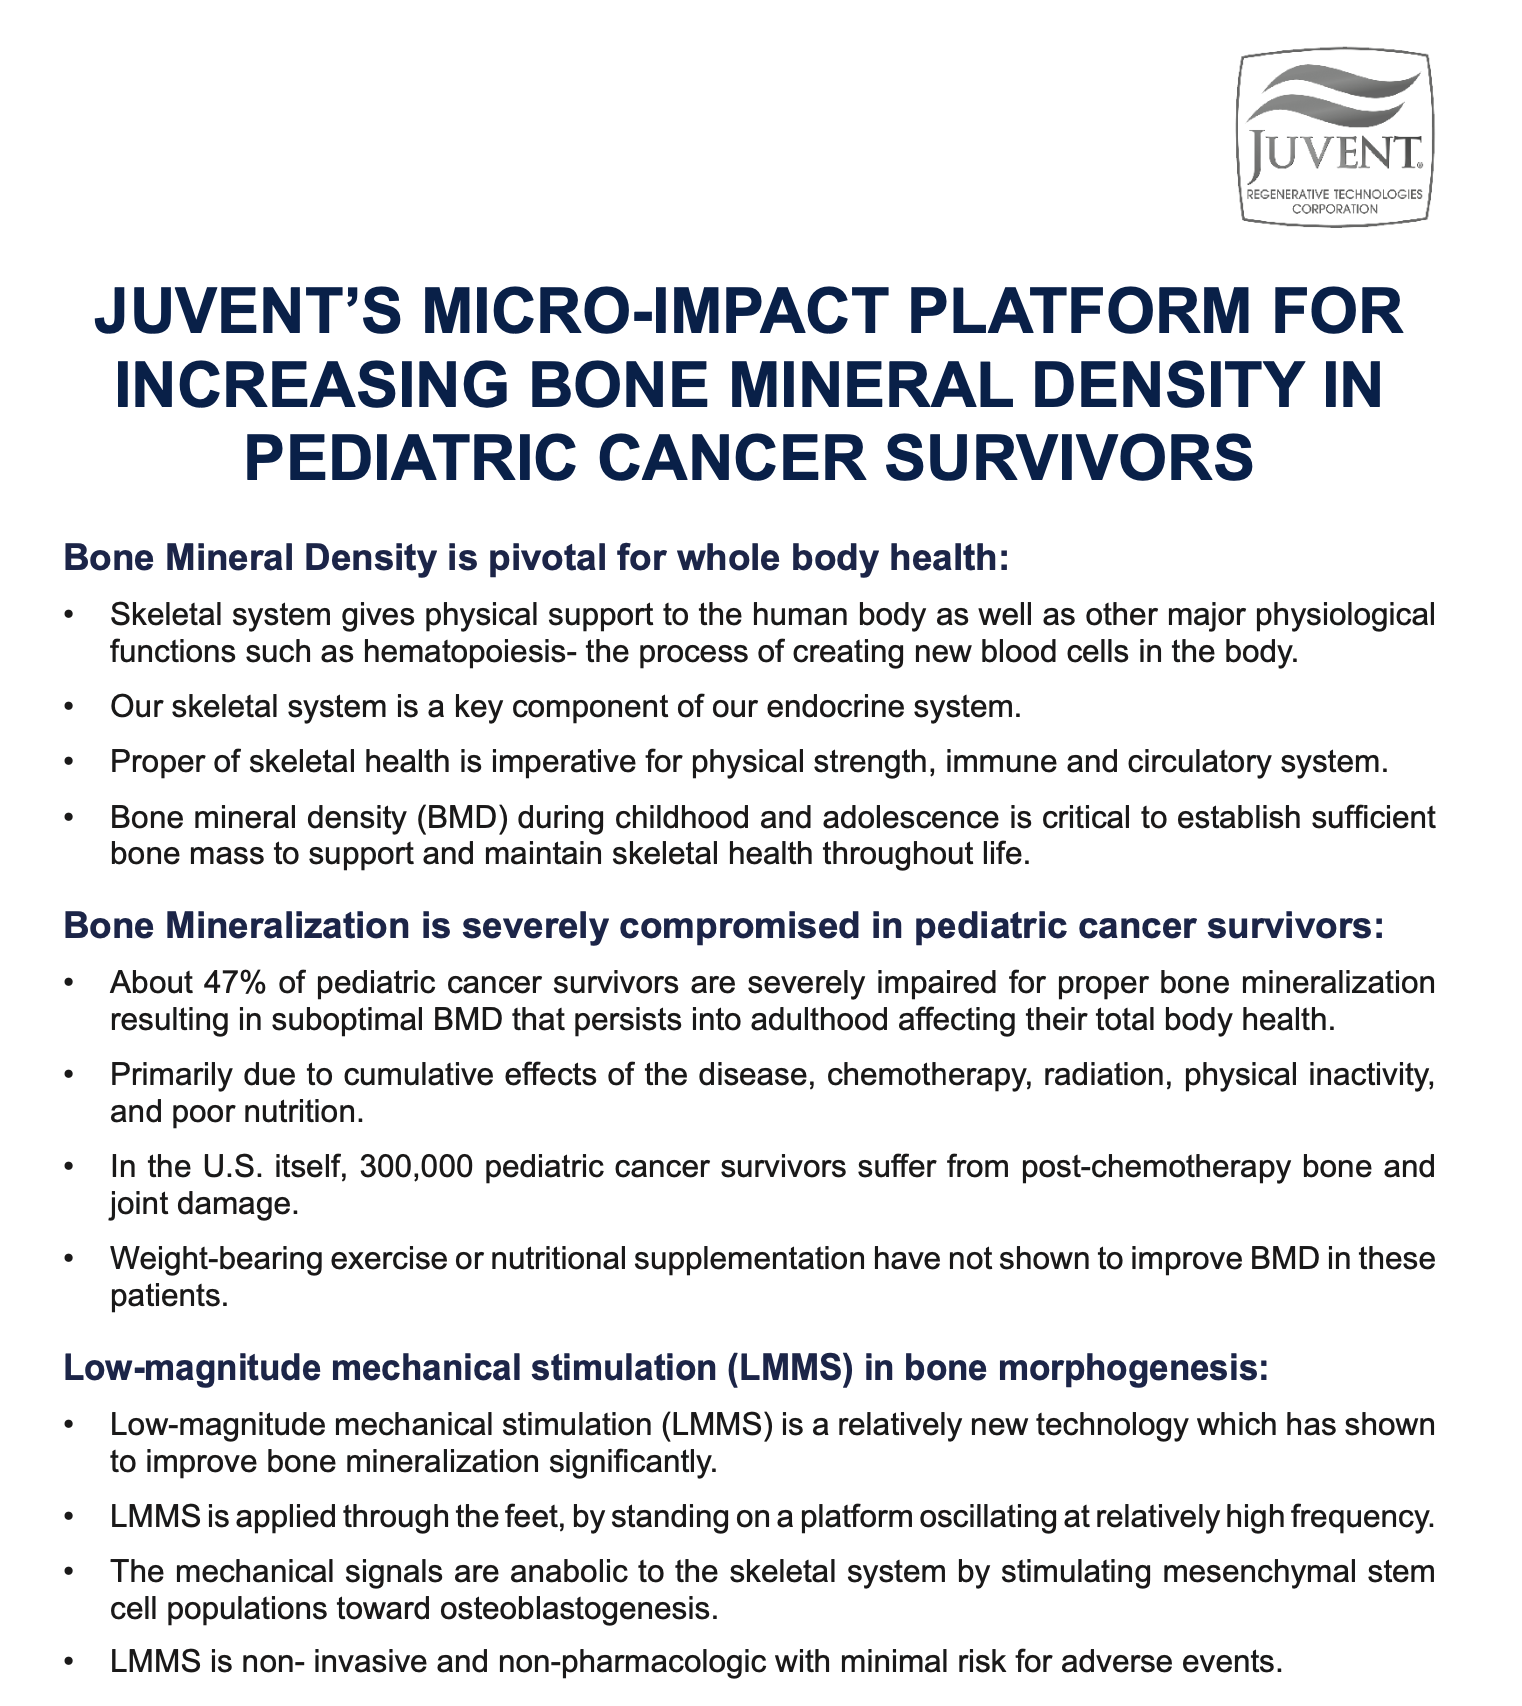 Research showing the Juvent micro-impact platform's impact on increasing bone mineral density in pediatric cancer survivors.